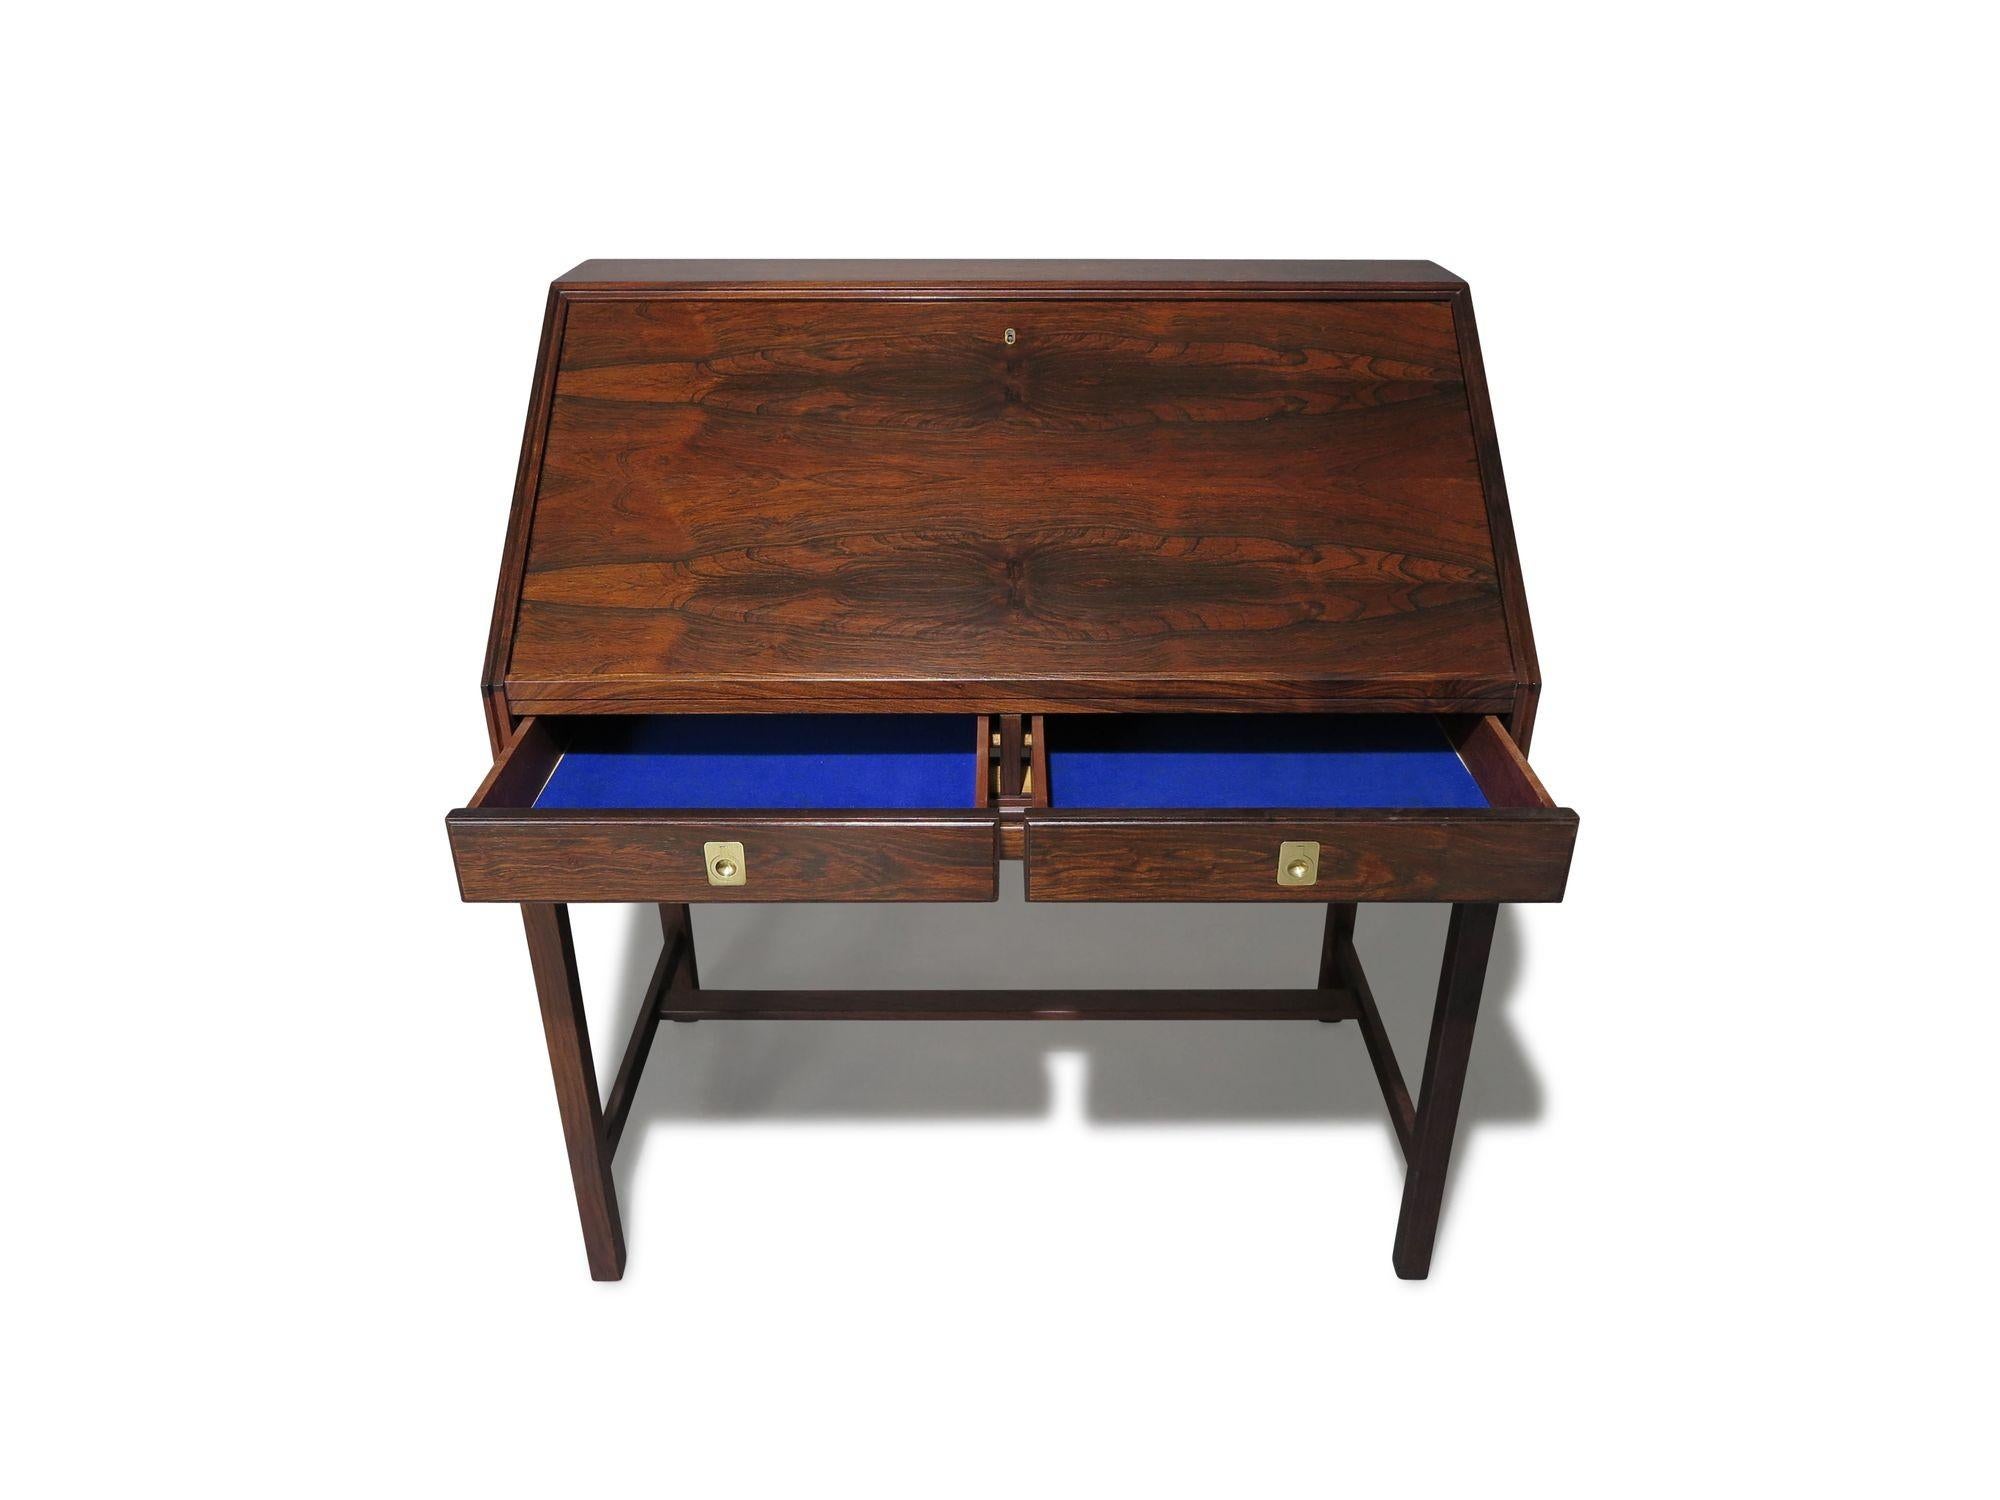 Danish secretary desk designed by Torbjørn Afdal for Nesjestranda Møbelfabrik, Norway, 1965. Crafted from Brazilian rosewood, the secretary desk features a locking drop-front desk that opens to reveal a rosewood interior with a series of small